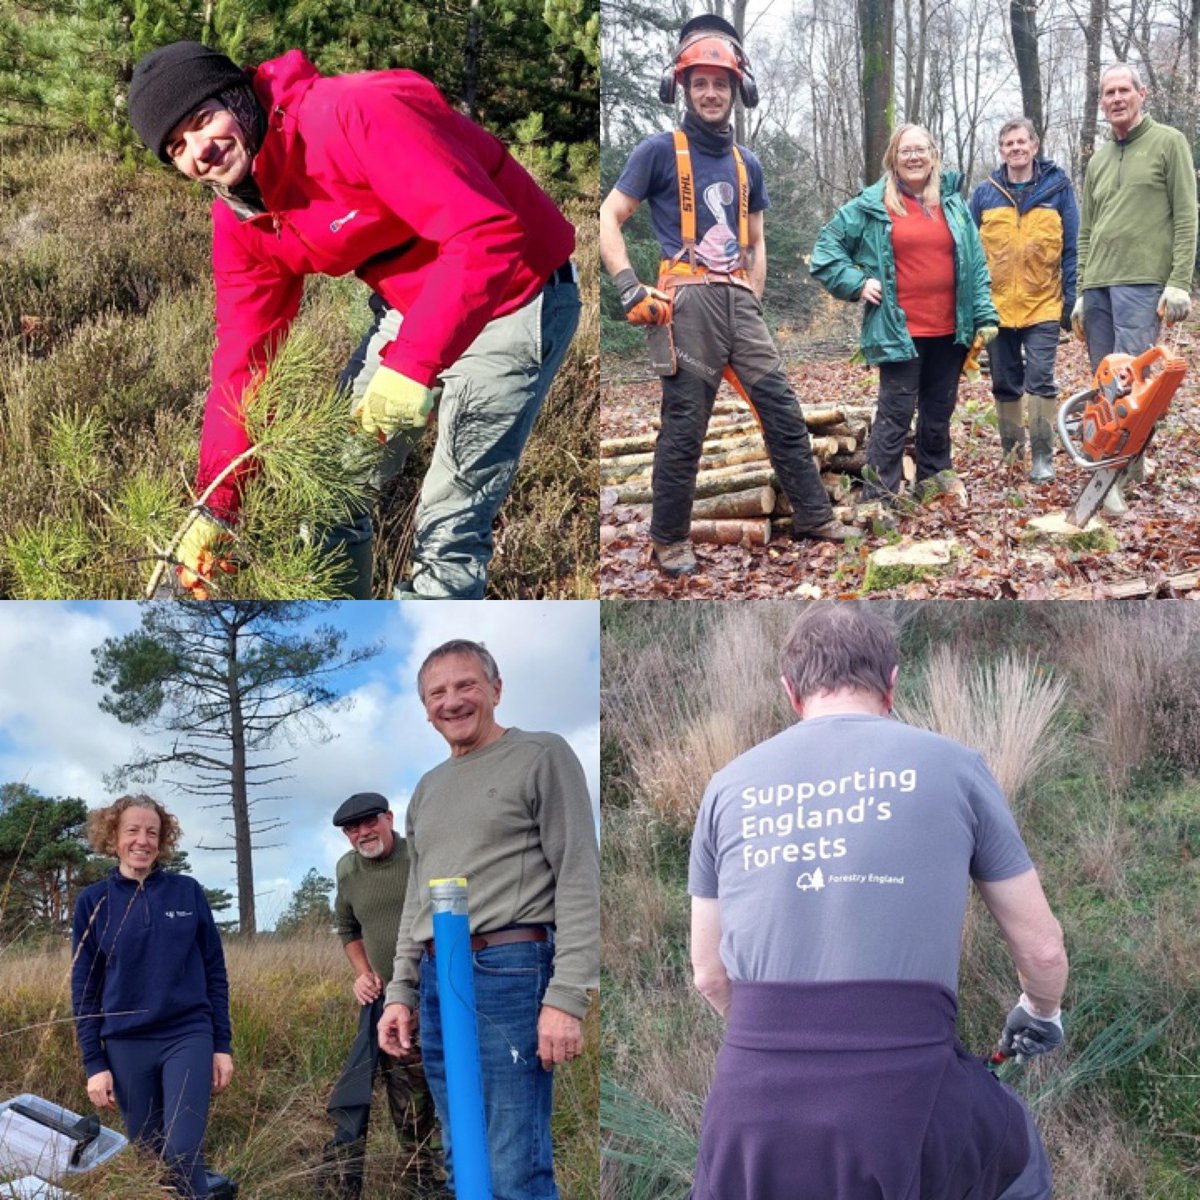 It's been a busy year in #DorsetForests with a wide range of conservation & wildlife projects, forestry works, community events, and educational campaigns carried out. Thank you to all of our staff, partners and volunteers for helping to care for this very special place 💚